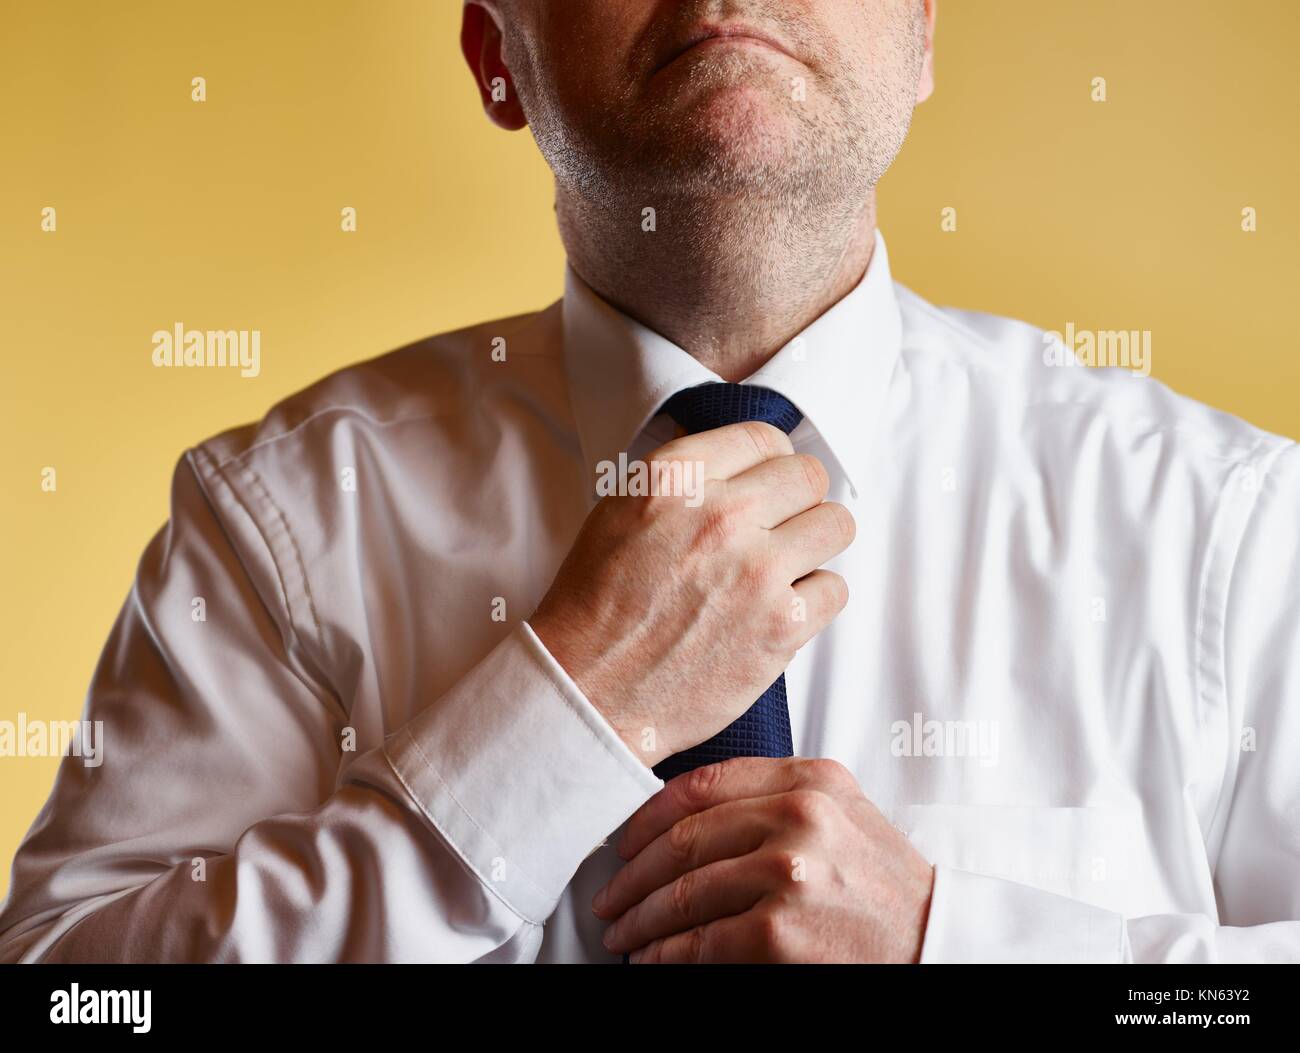 Close up, male wearing white shirt and blue tie, he tighten the tie knot, yellow background. Stock Photo